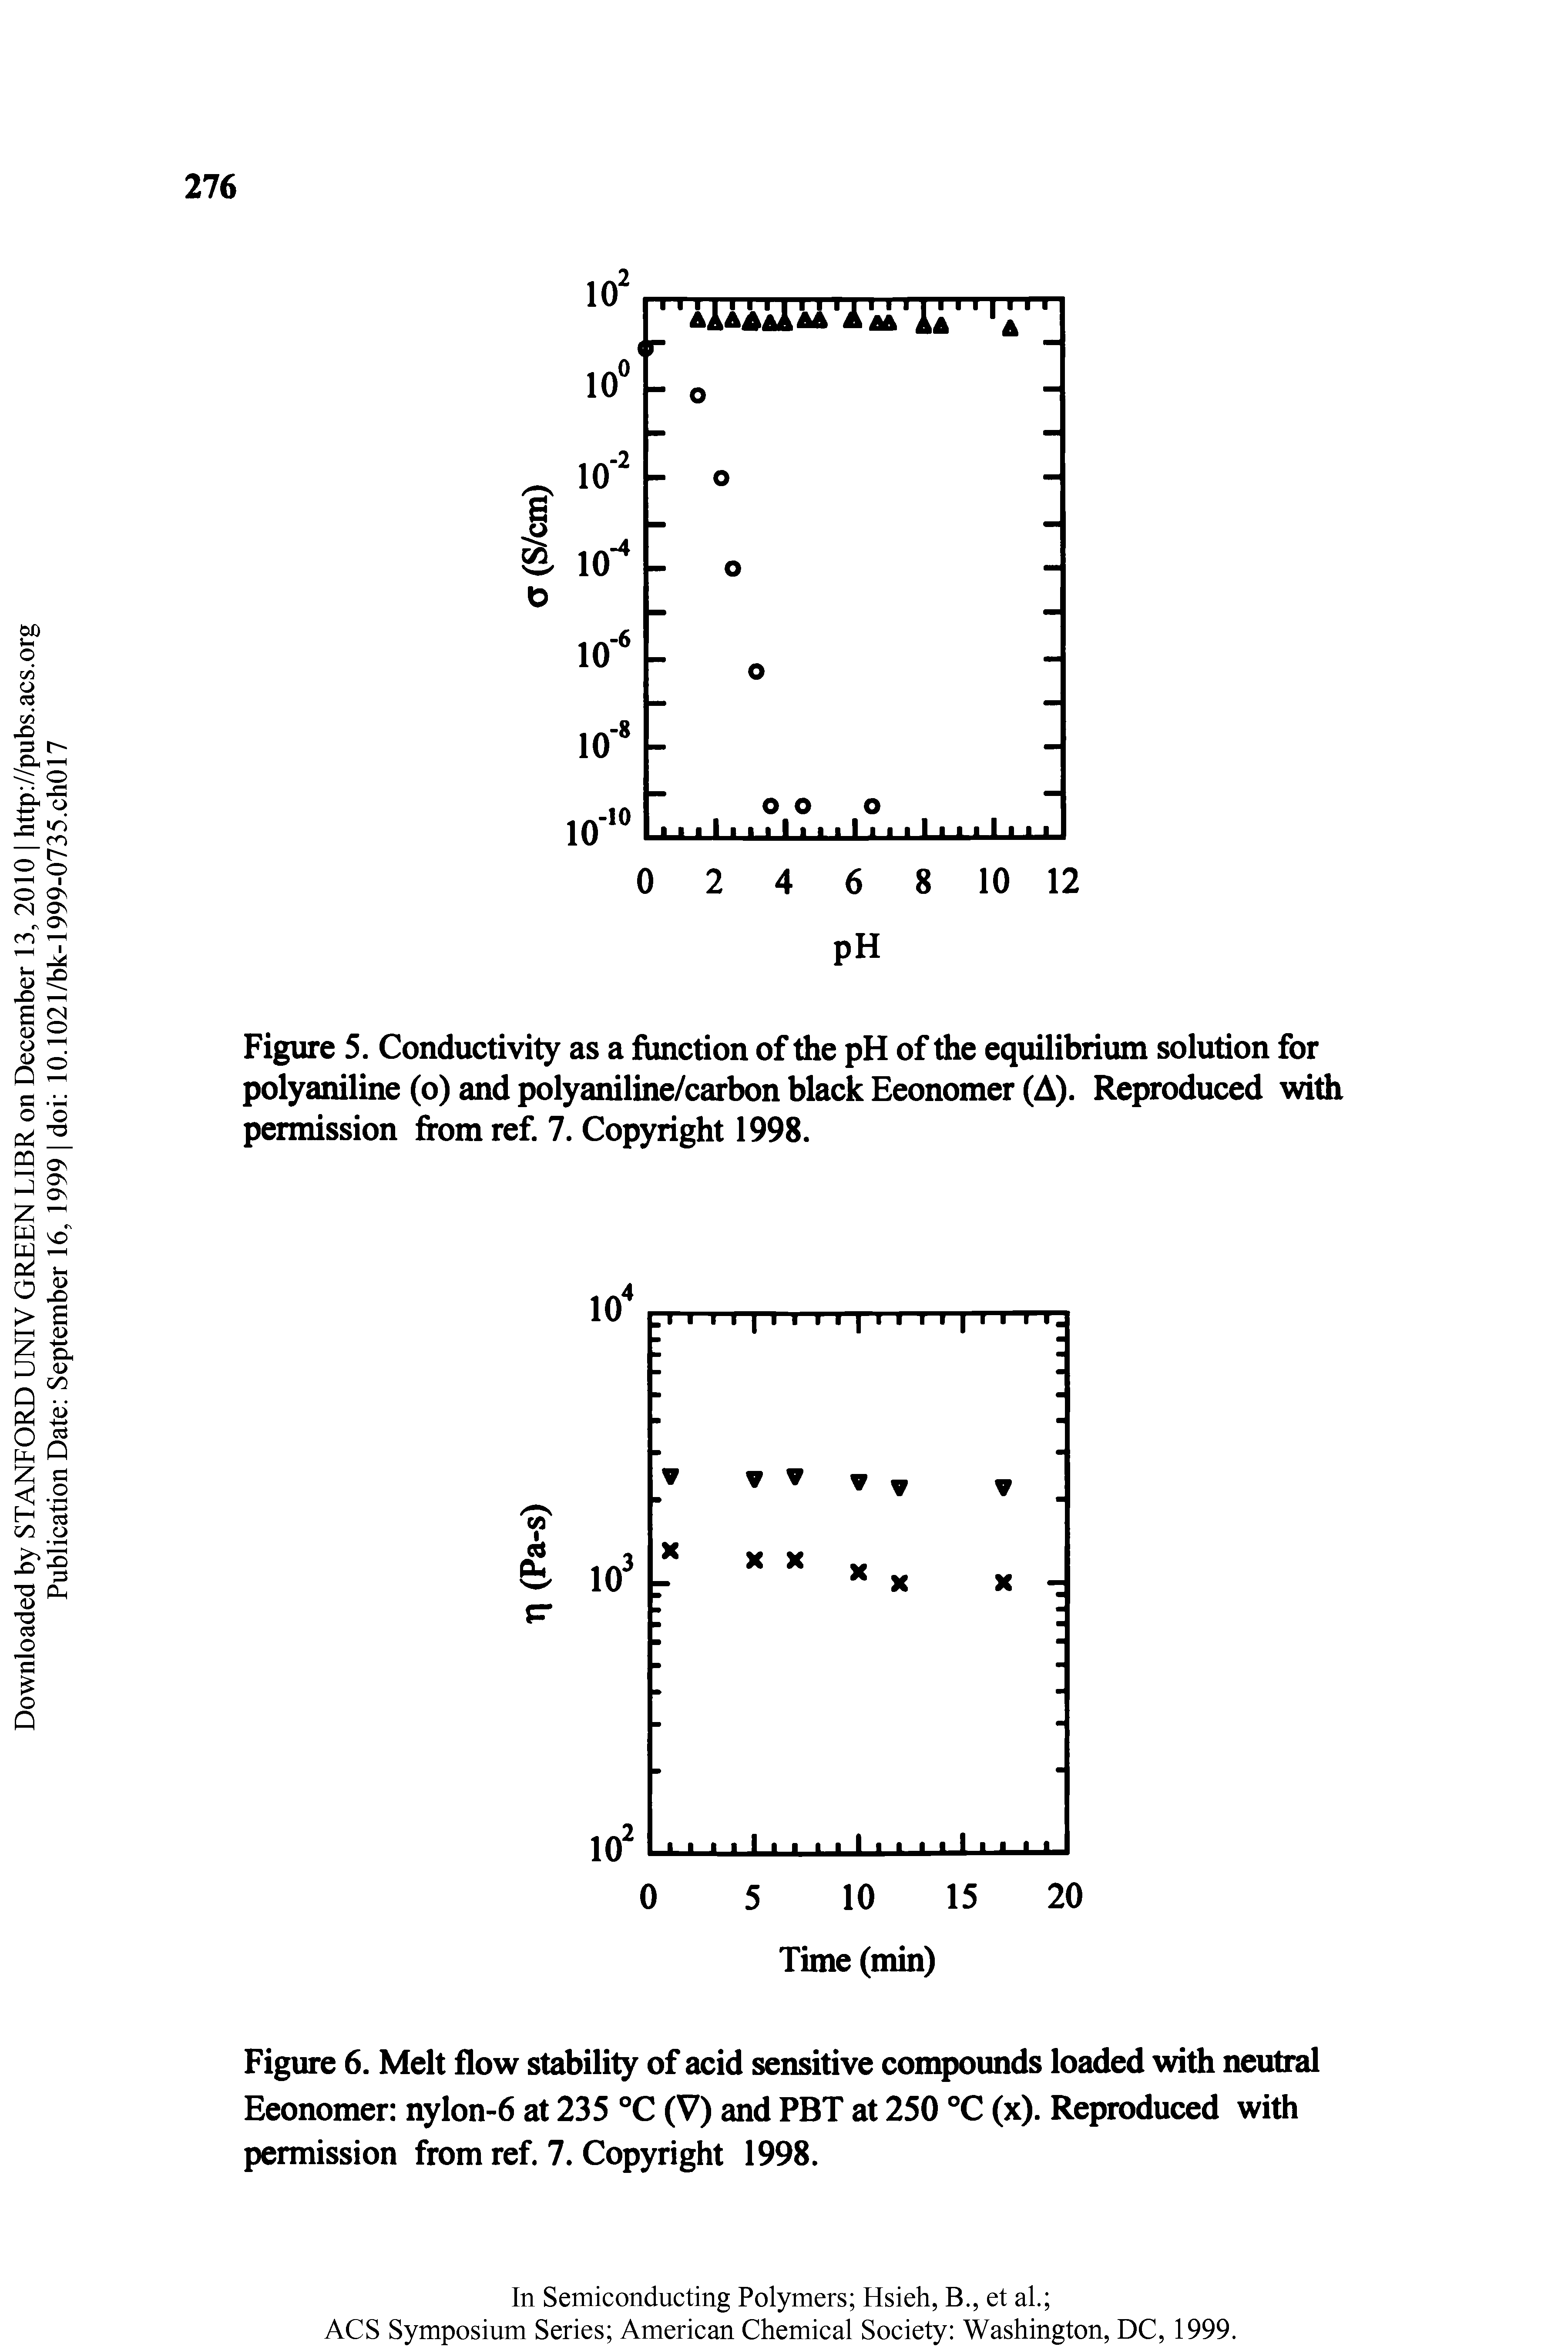 Figure 6. Melt flow stability of acid sensitive compounds loaded with neutral Eeonomer nylon-6 at 235 °C (V) and PBT at 250 °C (x). Reproduced with permission from ref. 7. Copyright 1998.